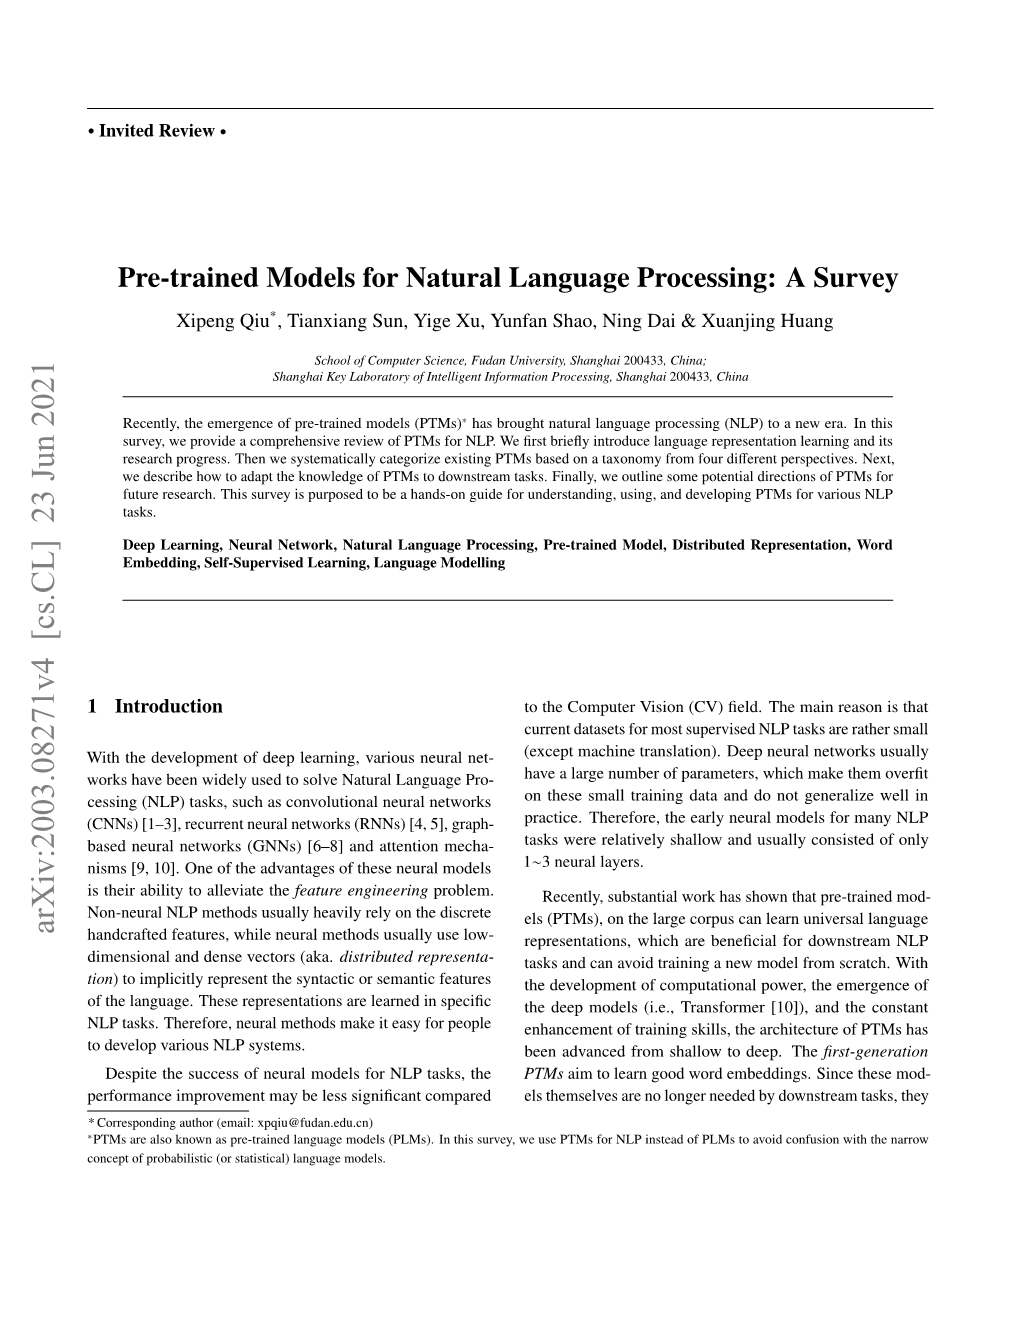 Pre-Trained Models for Natural Language Processing: a Survey